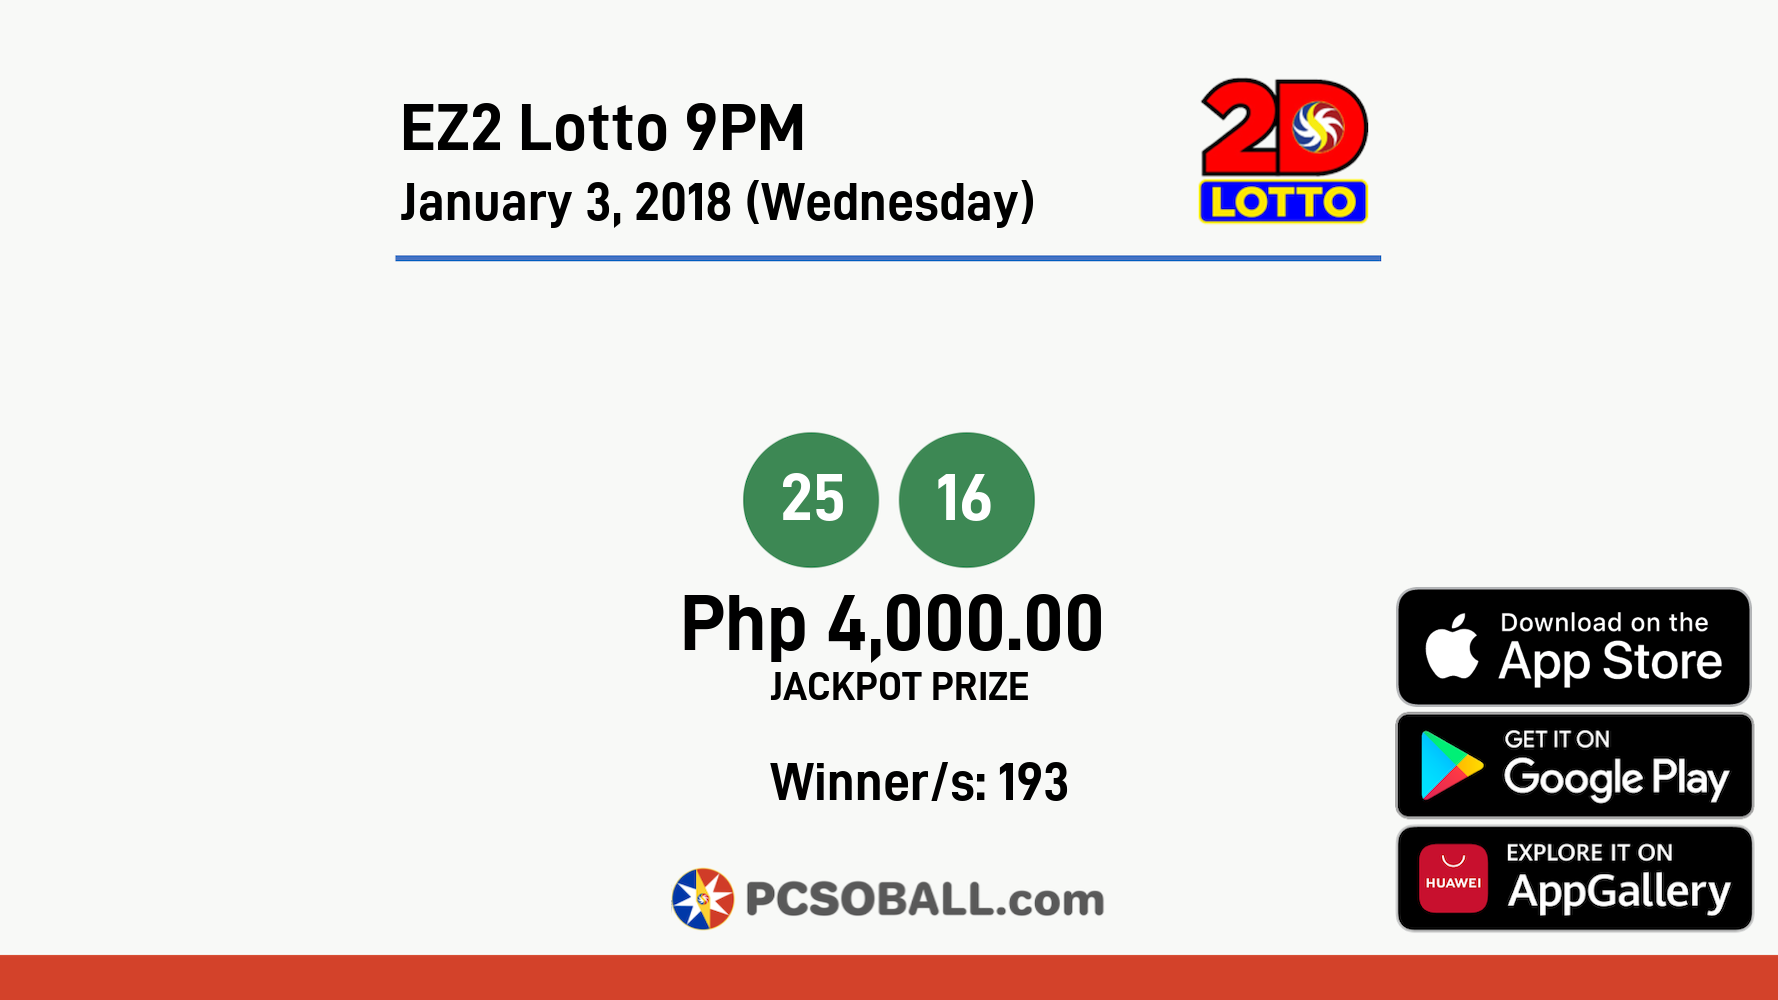 EZ2 Lotto 9PM January 3, 2018 (Wednesday) Result